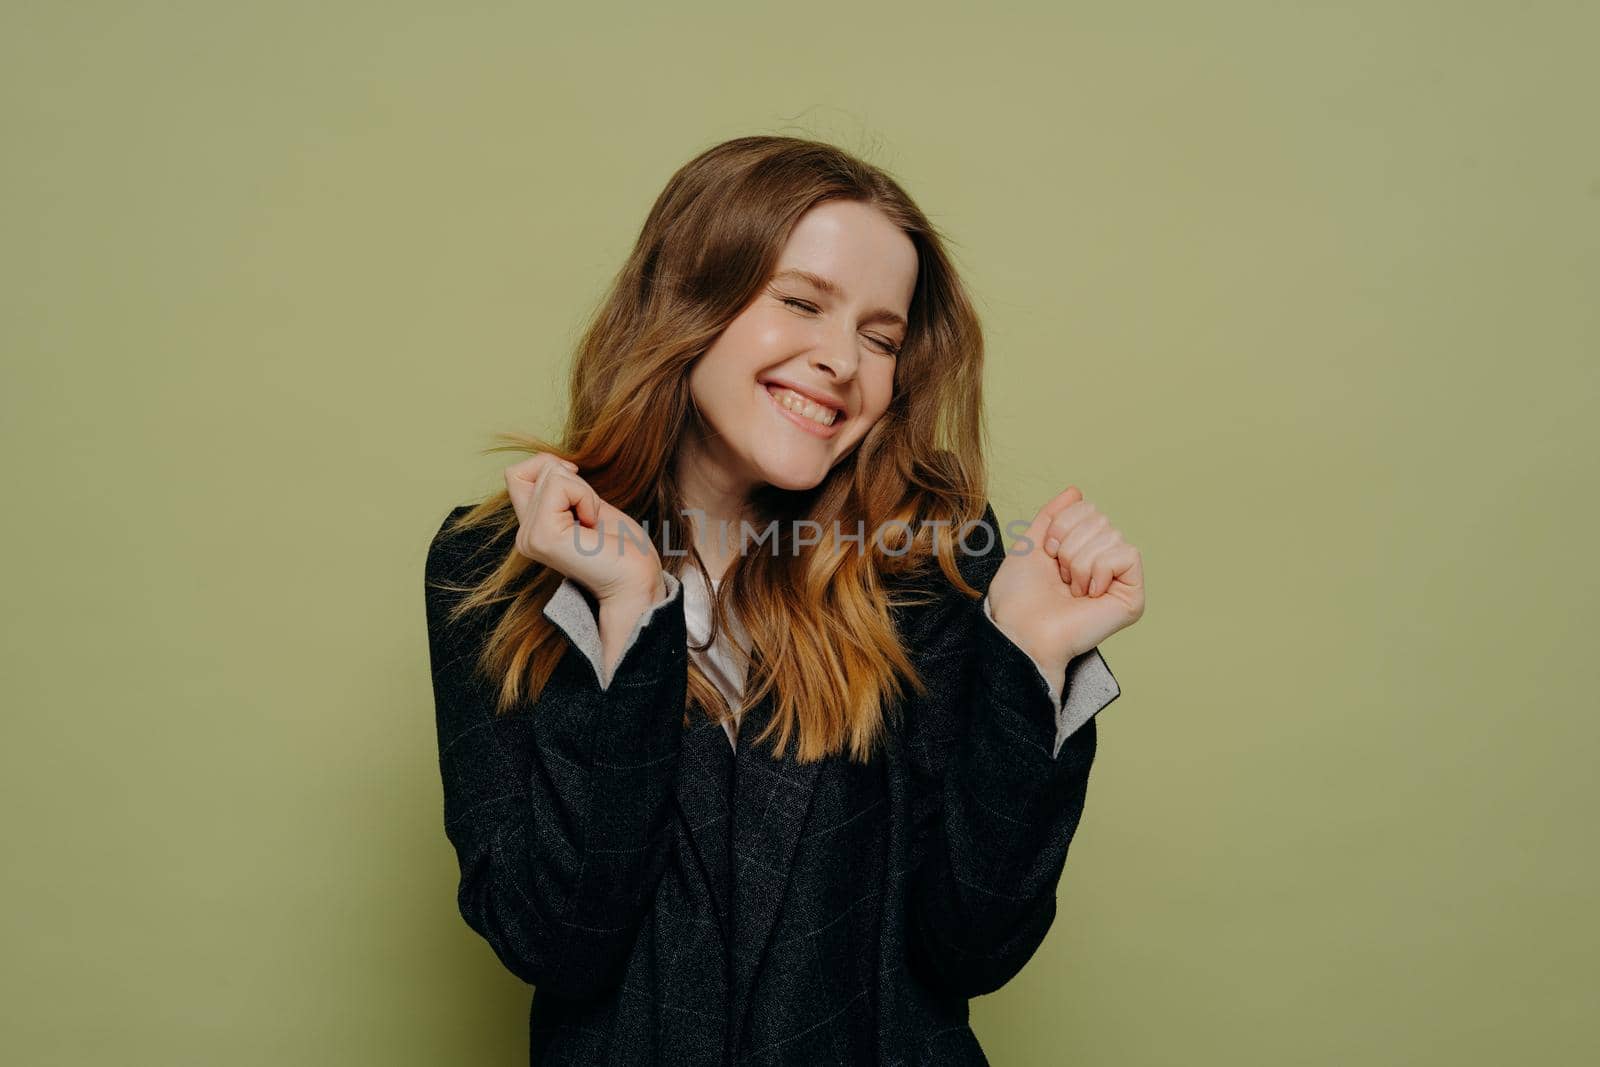 Celebrating success. Pleased young female with wavy brown hair holding hands up expressing happiness with closed eyes wearing dark formal jacket, posing against light studio background